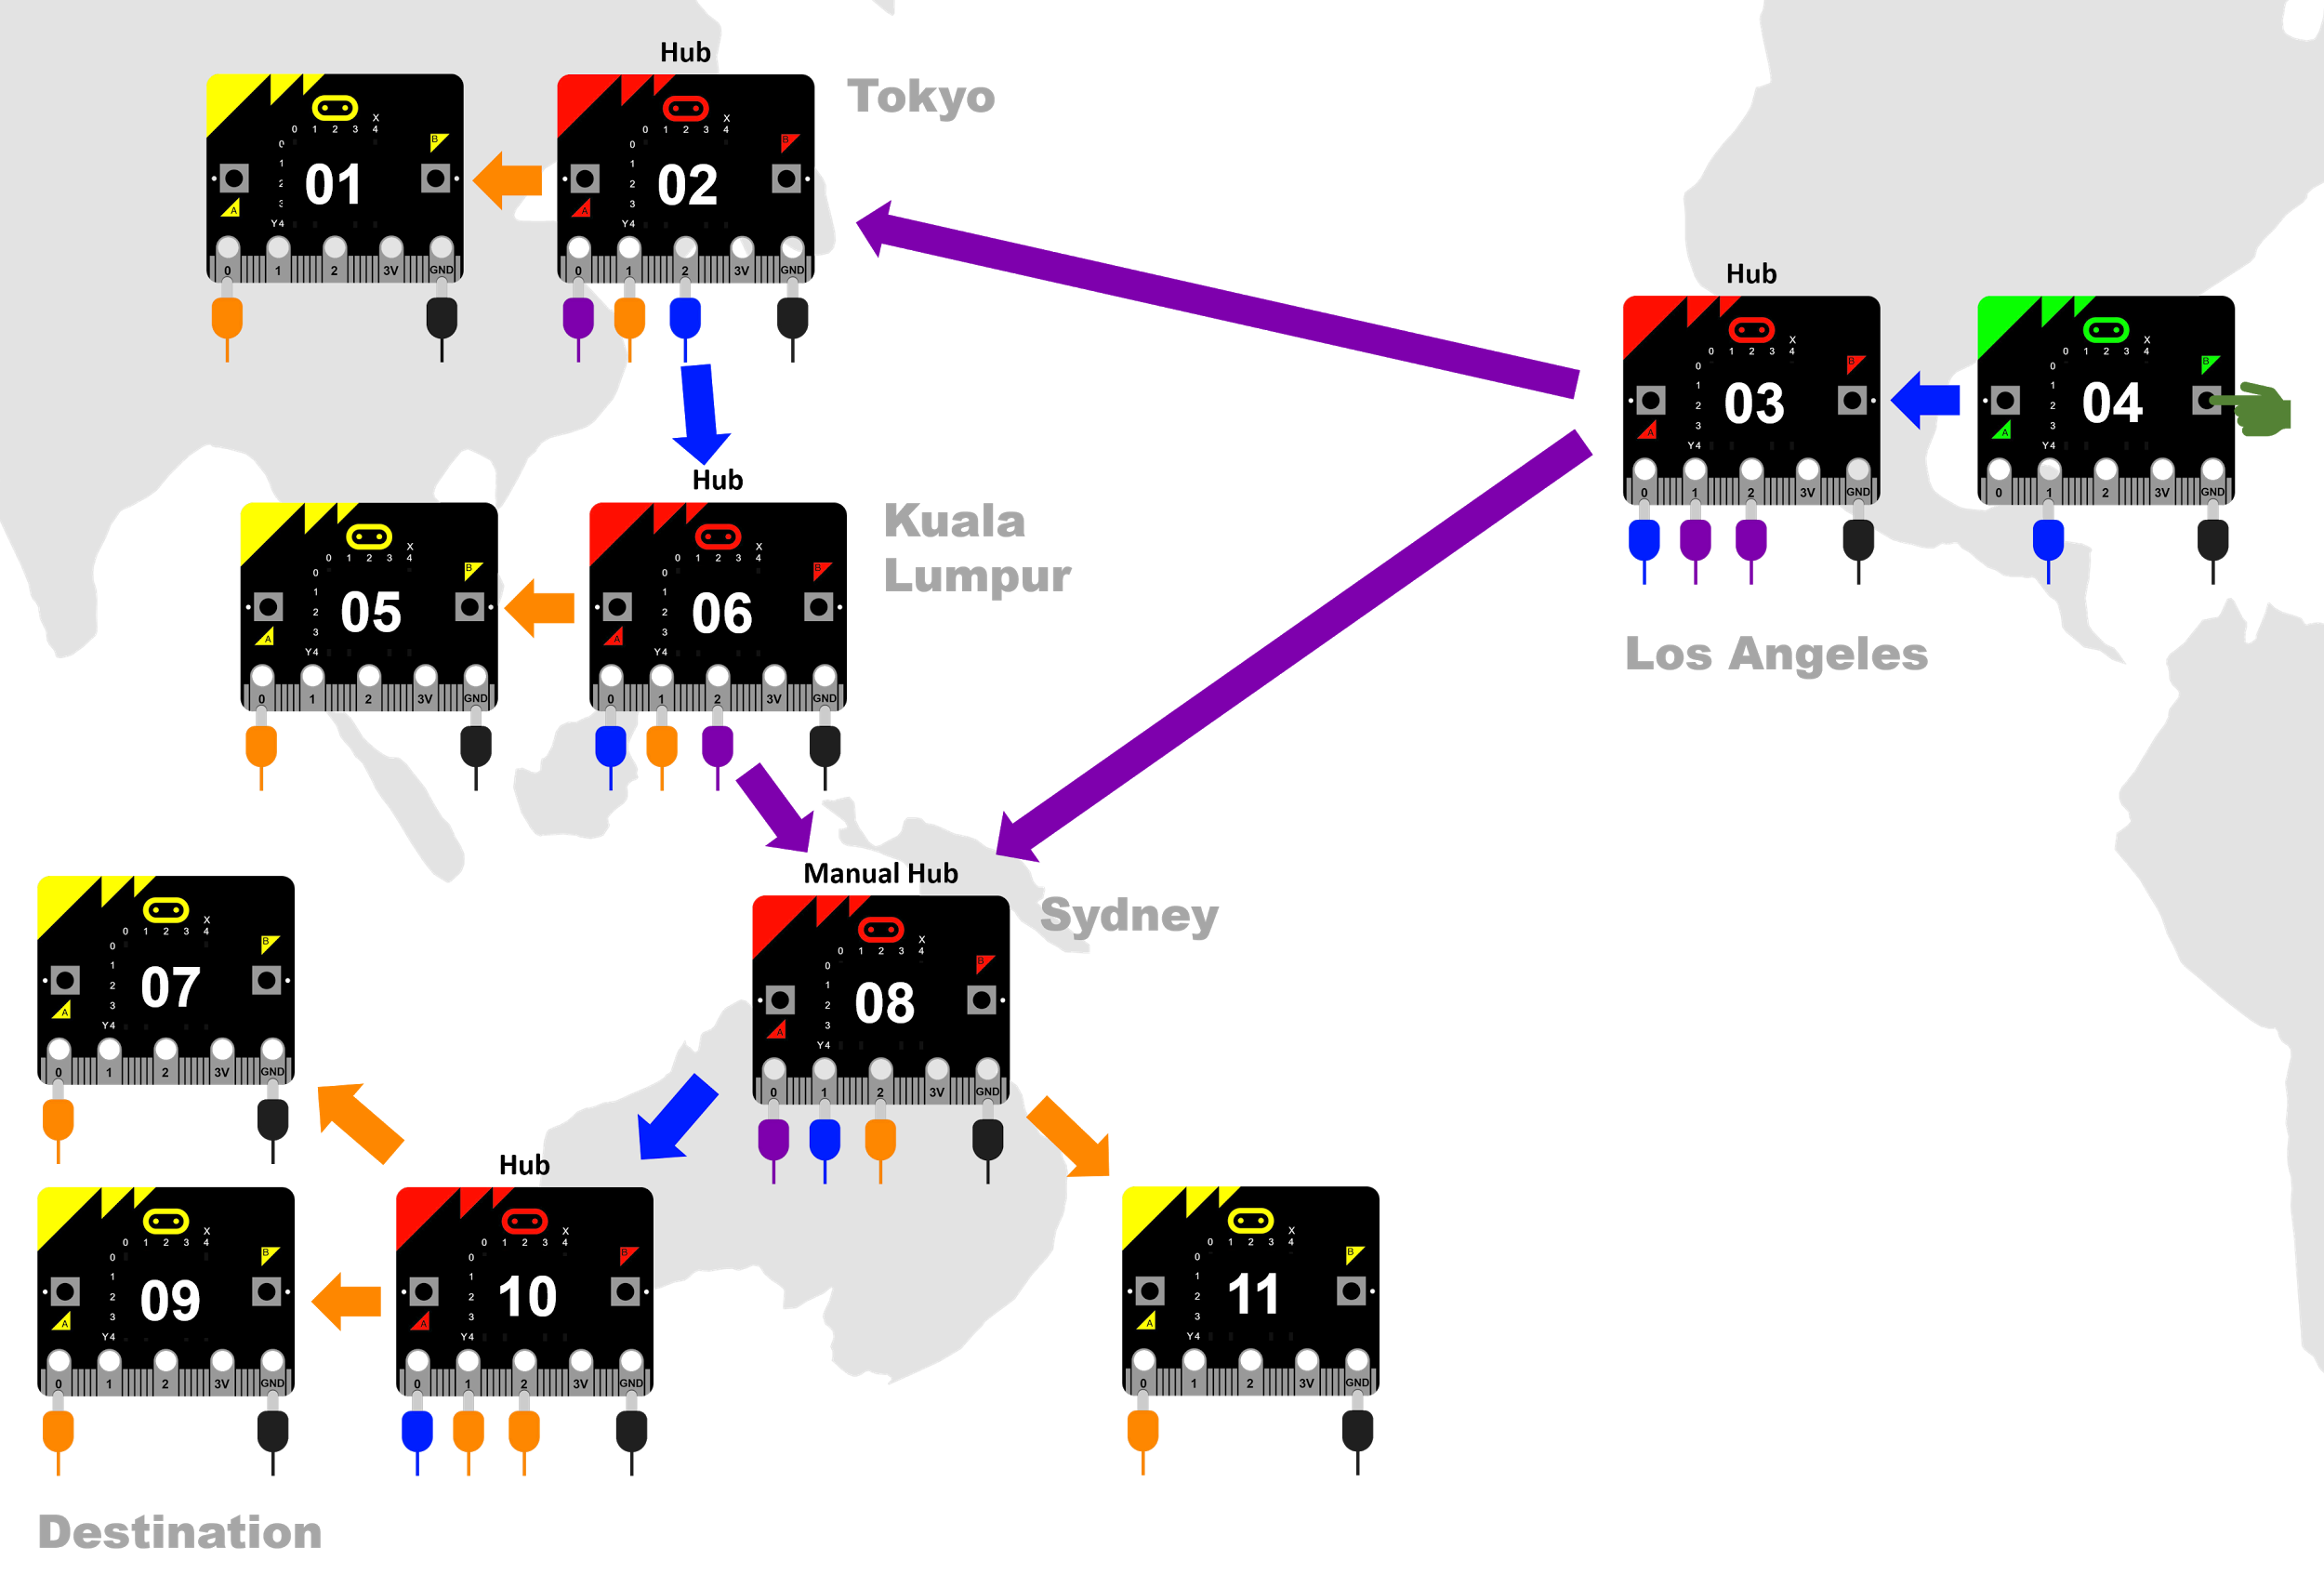 Diagram of eleven micro:bits connected together in Japan, Malaysia, Australia and the USA. Device 4 is green. It is the transmitter. Button B on the device is being pressed. It has a blue cable on Pin 1 and a black cable on the GND pin. It has a blue arrow pointing to Device 3, a Hub. Device 3 is a hub. It is red. It transmits to Device 2, which is labelled hub; and Device 8, which is labelled manual hub. Device 3 has a blue cable on the 0 pin; two purple cables on the 1 and 2 pins and a black cable on the GND pin. Device 2 is a hub. It is red. It has an orange arrow pointing to Device 1 and a blue arrow pointing to Device 6, a hub. Device 1 is yellow. It has an orange cable on Pin 1 and a black cable on the GND pin. Device 6 is a hub. It is red. It has an orange arrow pointing to device 5 and a purple arrow pointing to device 8, which is a manual hub. It has a blue cable on Pin 0, an orange cable on Pin 1, a purple cable on Pin 2 and a black cable on the GND pin. Device 5 is yellow. It has an orange cable on Pin 0 and a black cable on the GND pin. Device 8 is a hub. It is red. It has a blue arrow pointing to Device 10, a hub, and an orange arrow pointing to Device 11. It has a purple cable on Pin 0, a blue cable on Pin 1, an orange cable on Pin 2 and a black cable on the GND pin. Device 11 is yellow. It has an orange cable on Pin 0 and a black cable on the GND pin. Device 10 is a hub. It is red. It has a blue cable on Pin 0, orange cables on pins 1 and 2, and a black cable on the GND pin. Orange arrows point to Devices 7 and 9. Devices 7 and 9 are yellow. They both have an orange cable on Pin 0 and a black cable on the GND pins.